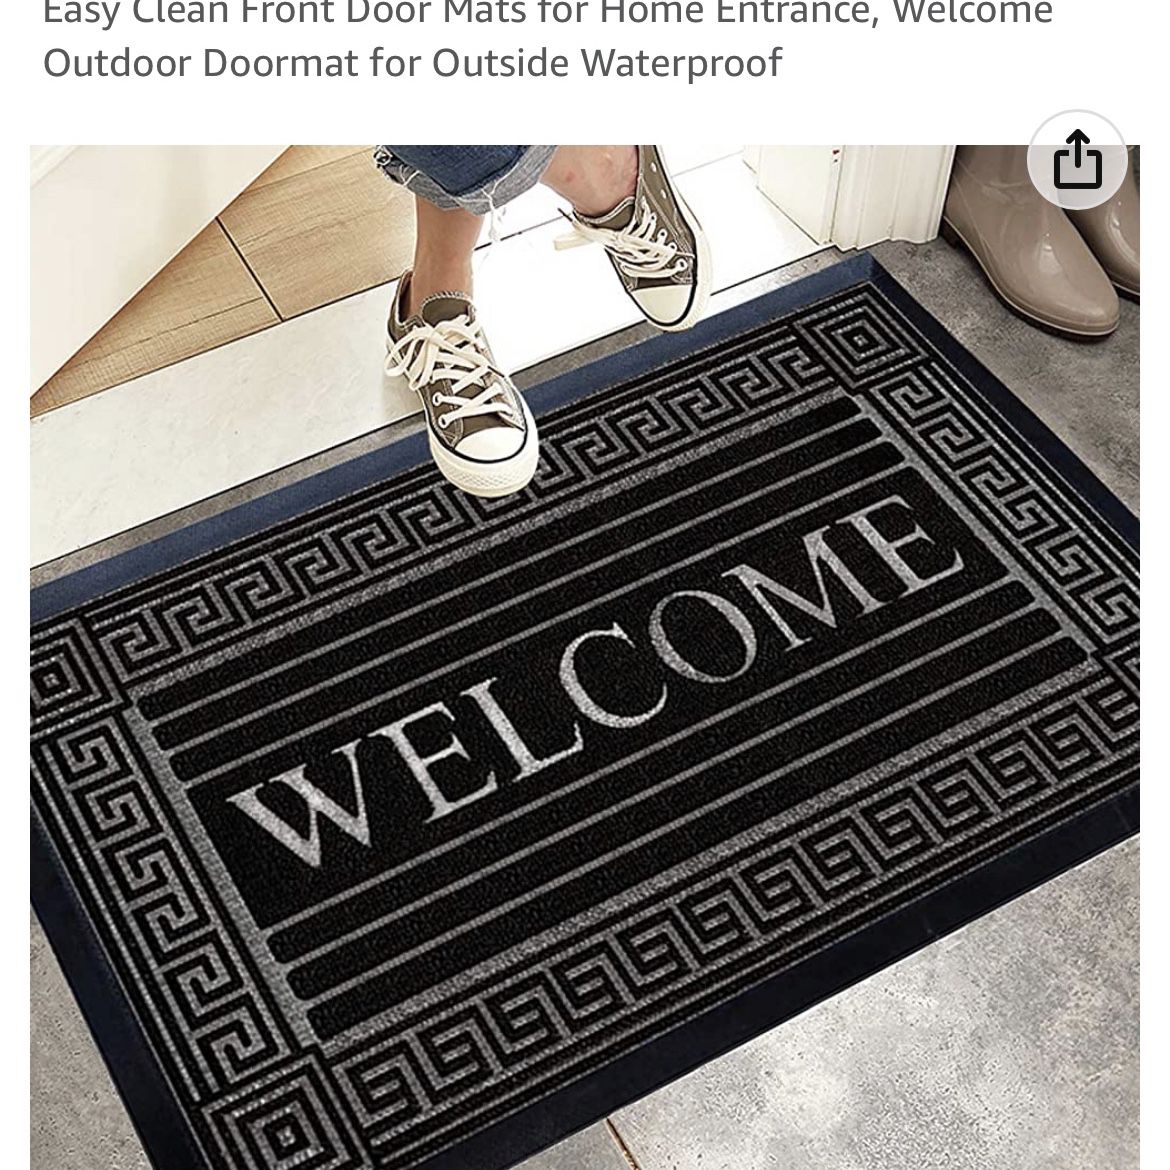 Welcome Door Mat with Non-Slip Heavy Duty Rubber Backing, Welcome